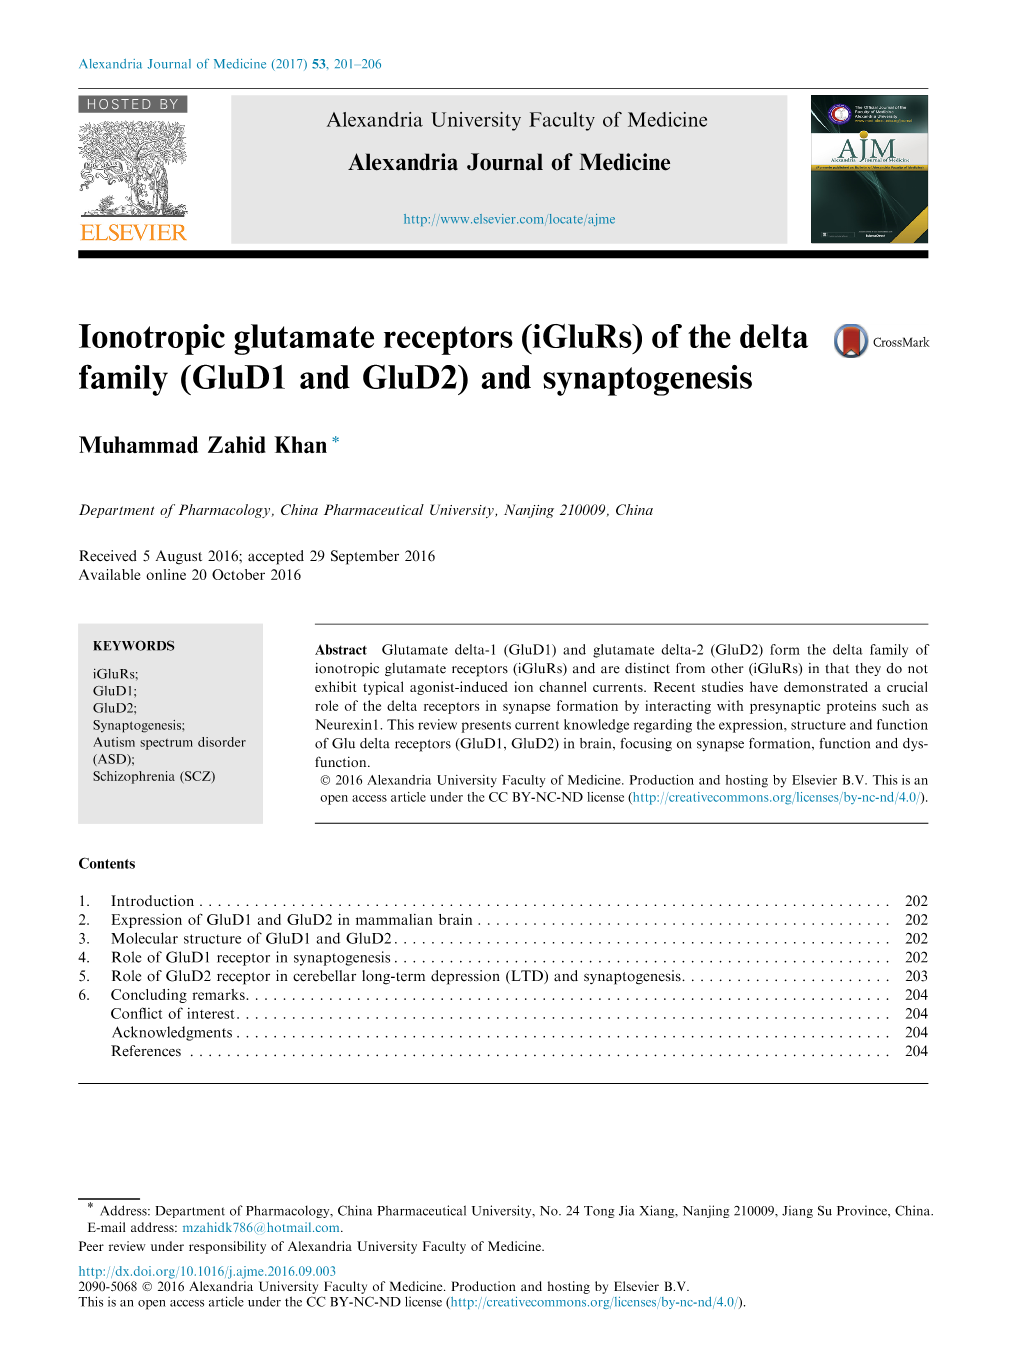 Ionotropic Glutamate Receptors (Iglurs) of the Delta Family (Glud1 and Glud2) and Synaptogenesis